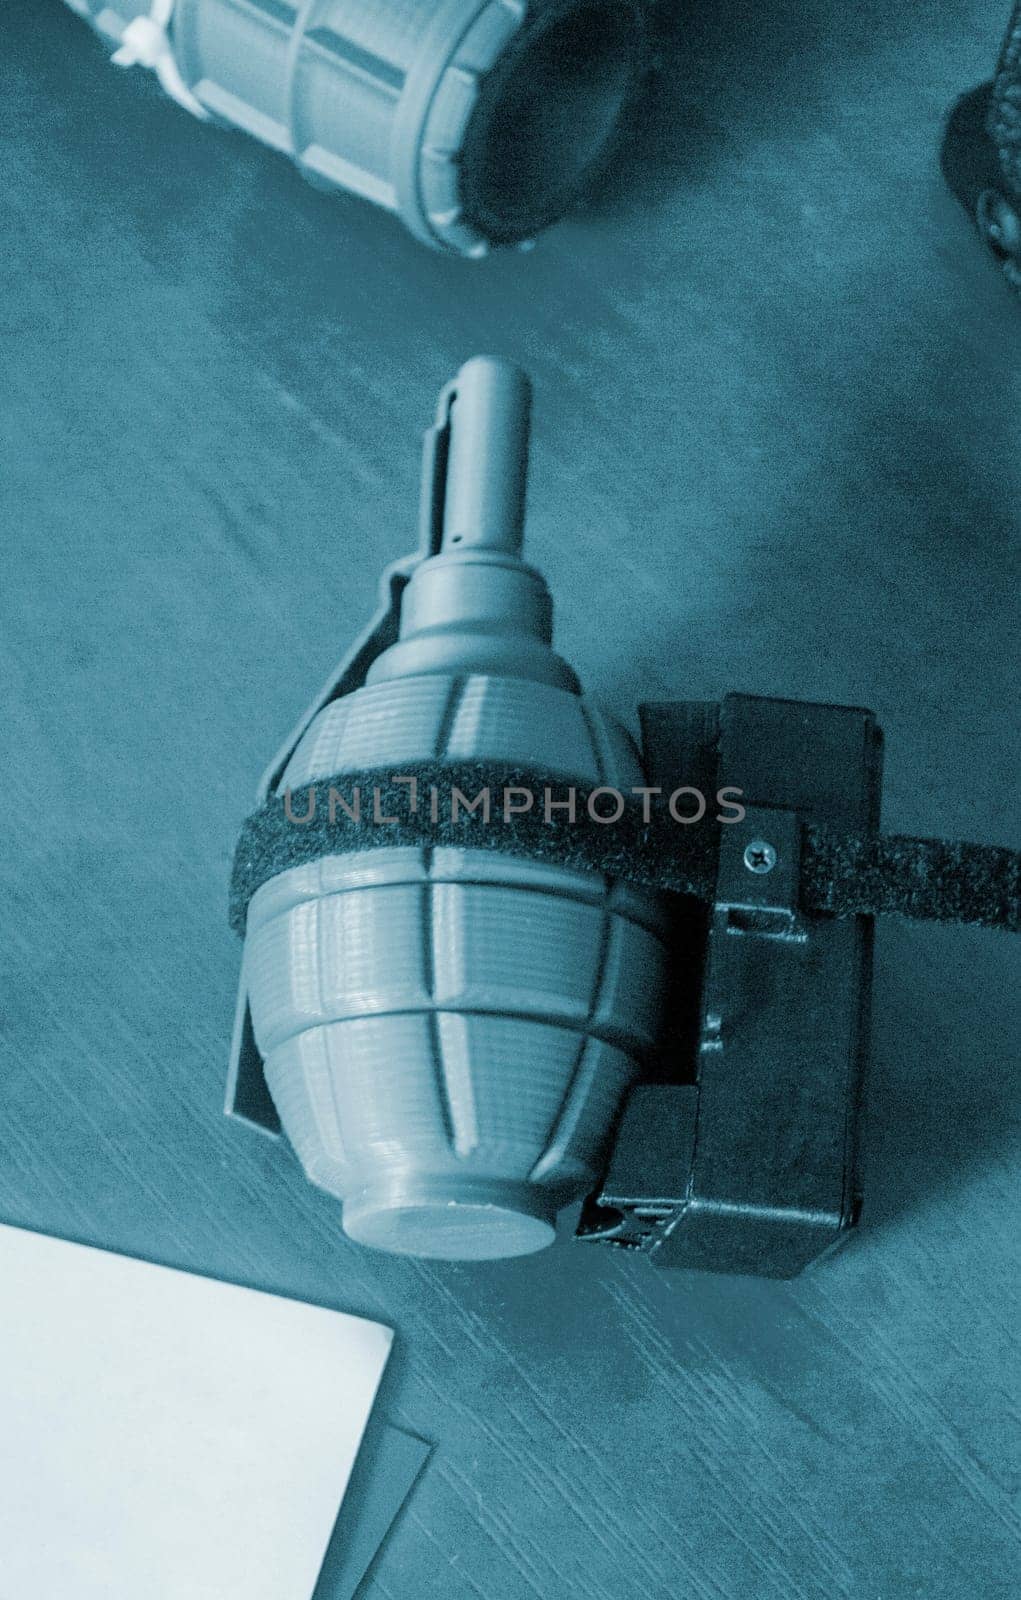 Prototype model of grenade ammunition printed on 3D printer. Small models of grenade defensive weapon printed on 3D printer from molten plastic on table. New modern innovation printing technology